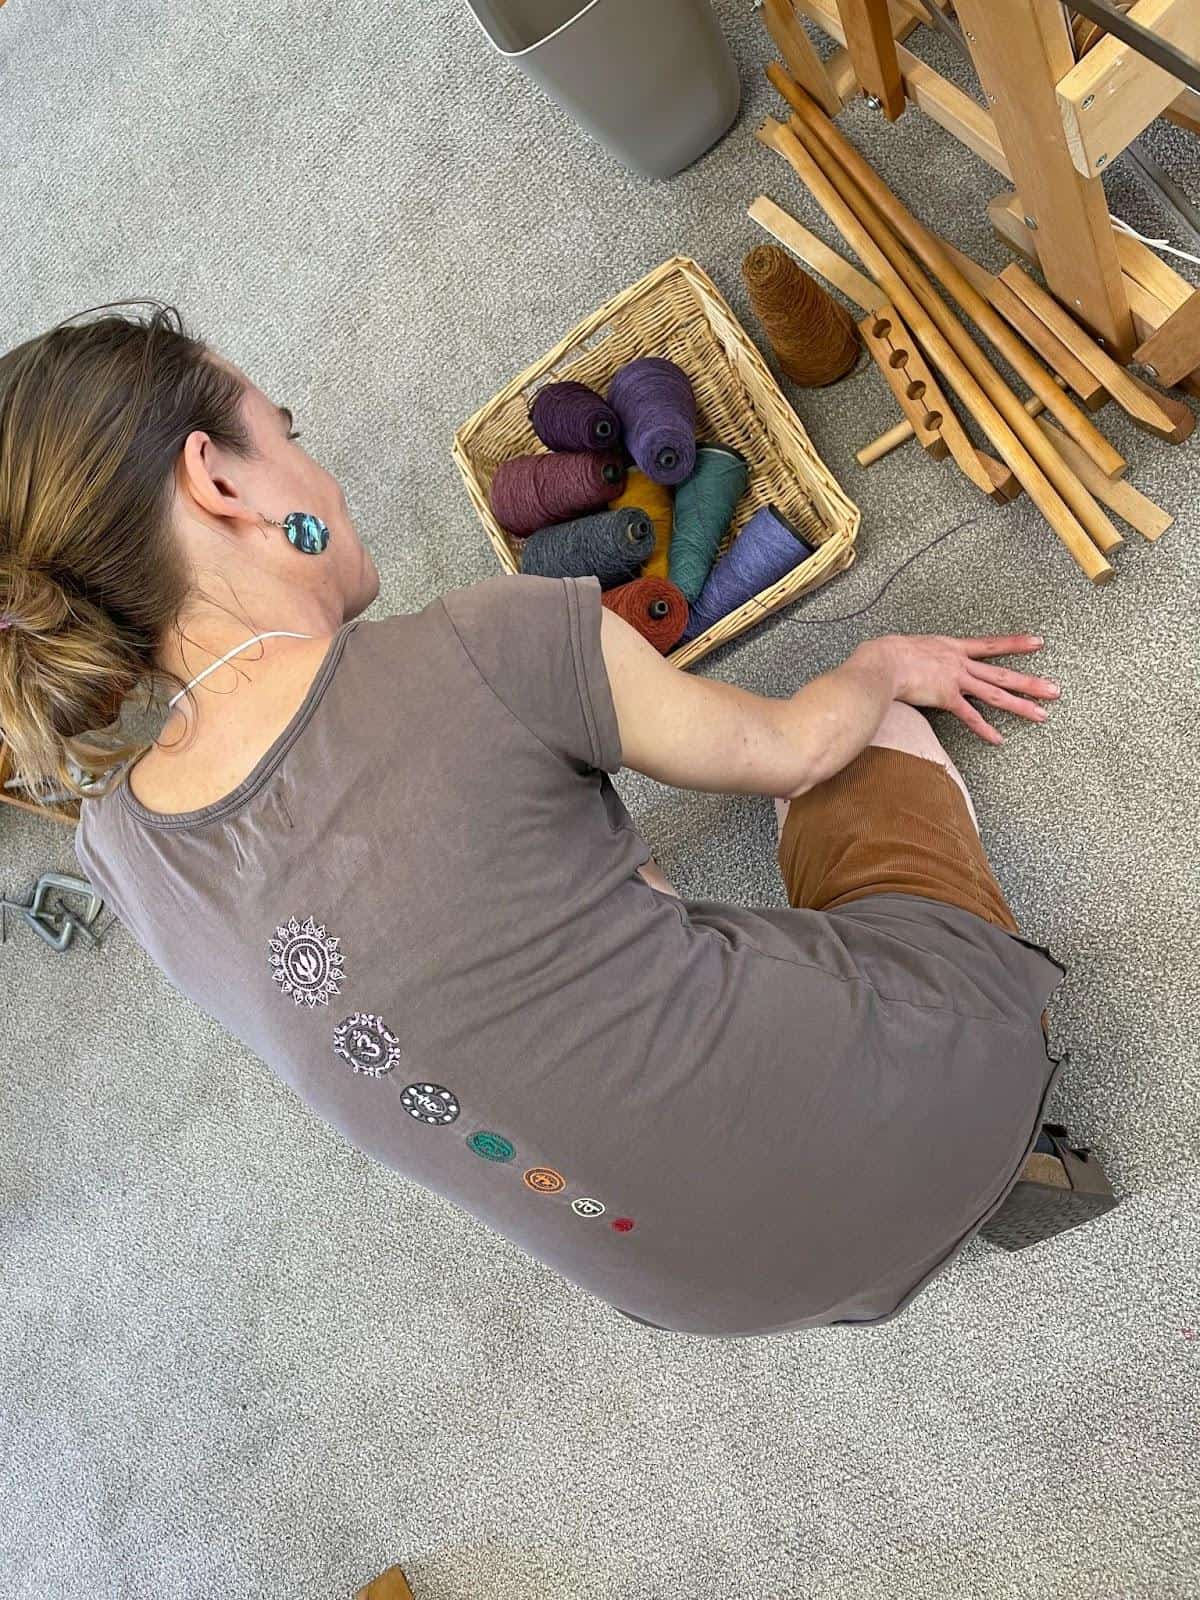 a woman sitting on the floor next to a basket of yarn.